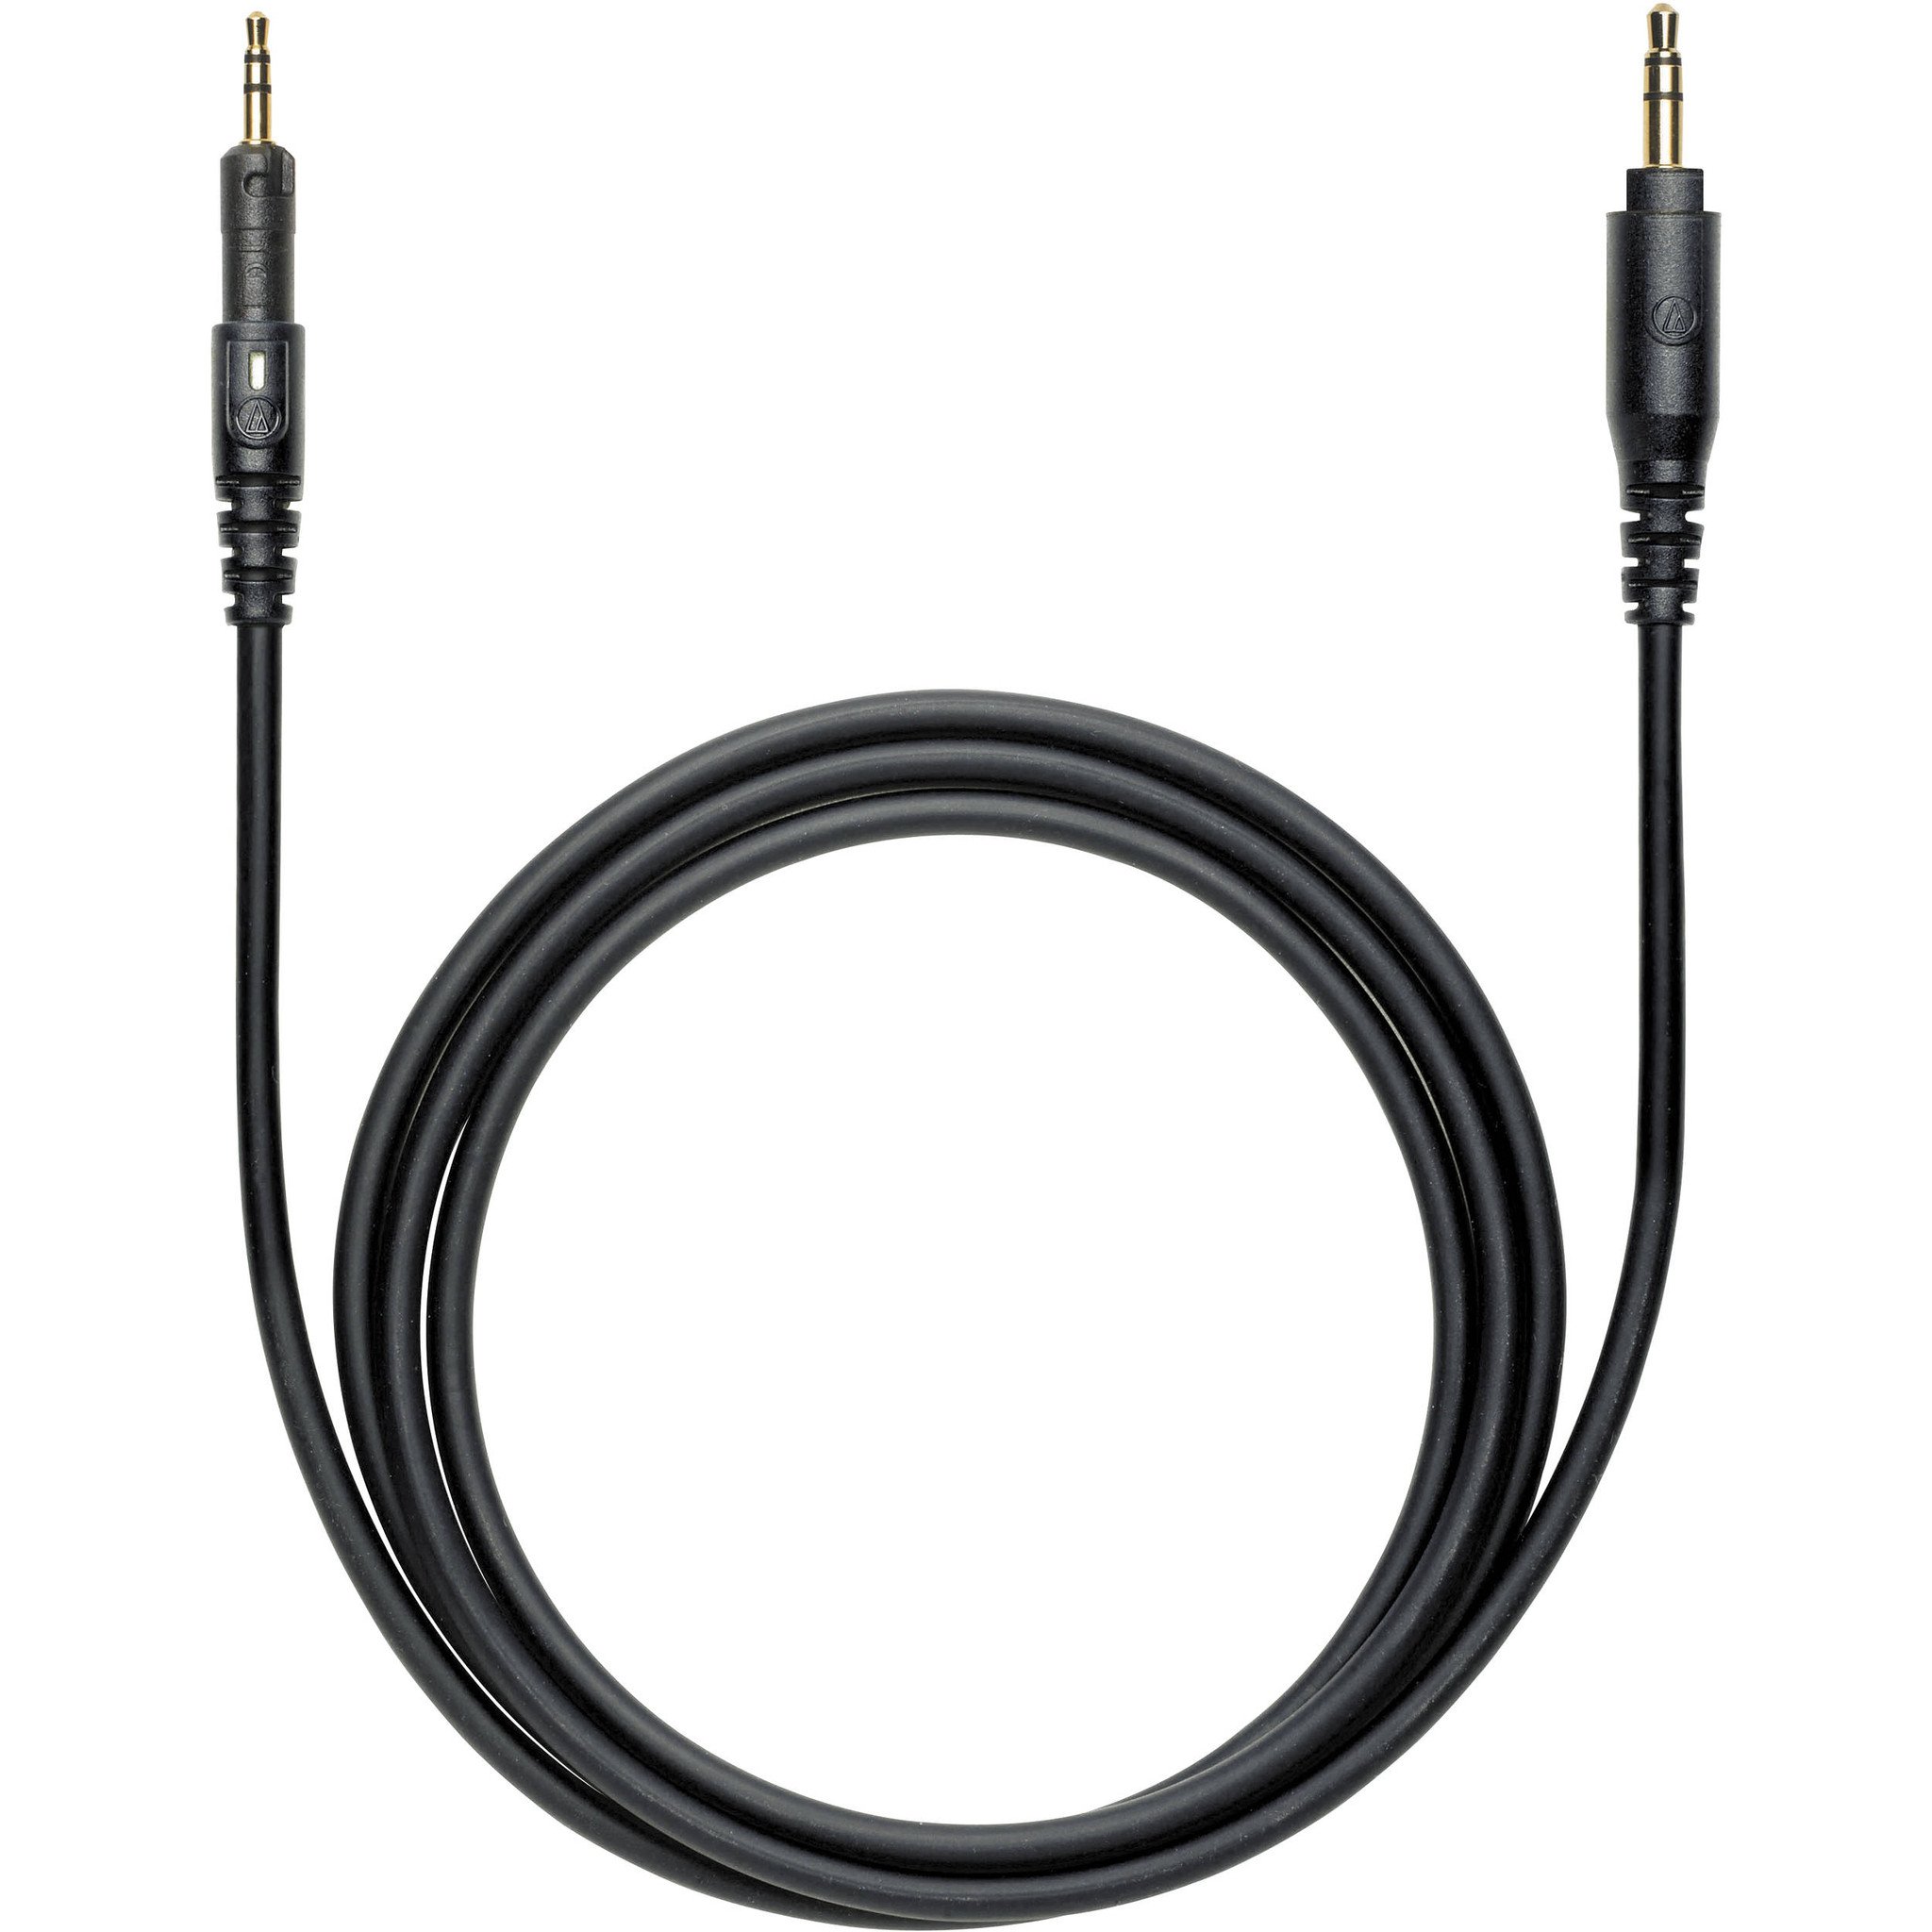 Audio Technica Replacement ATH-M50x Straight Cable 1.2metre ...